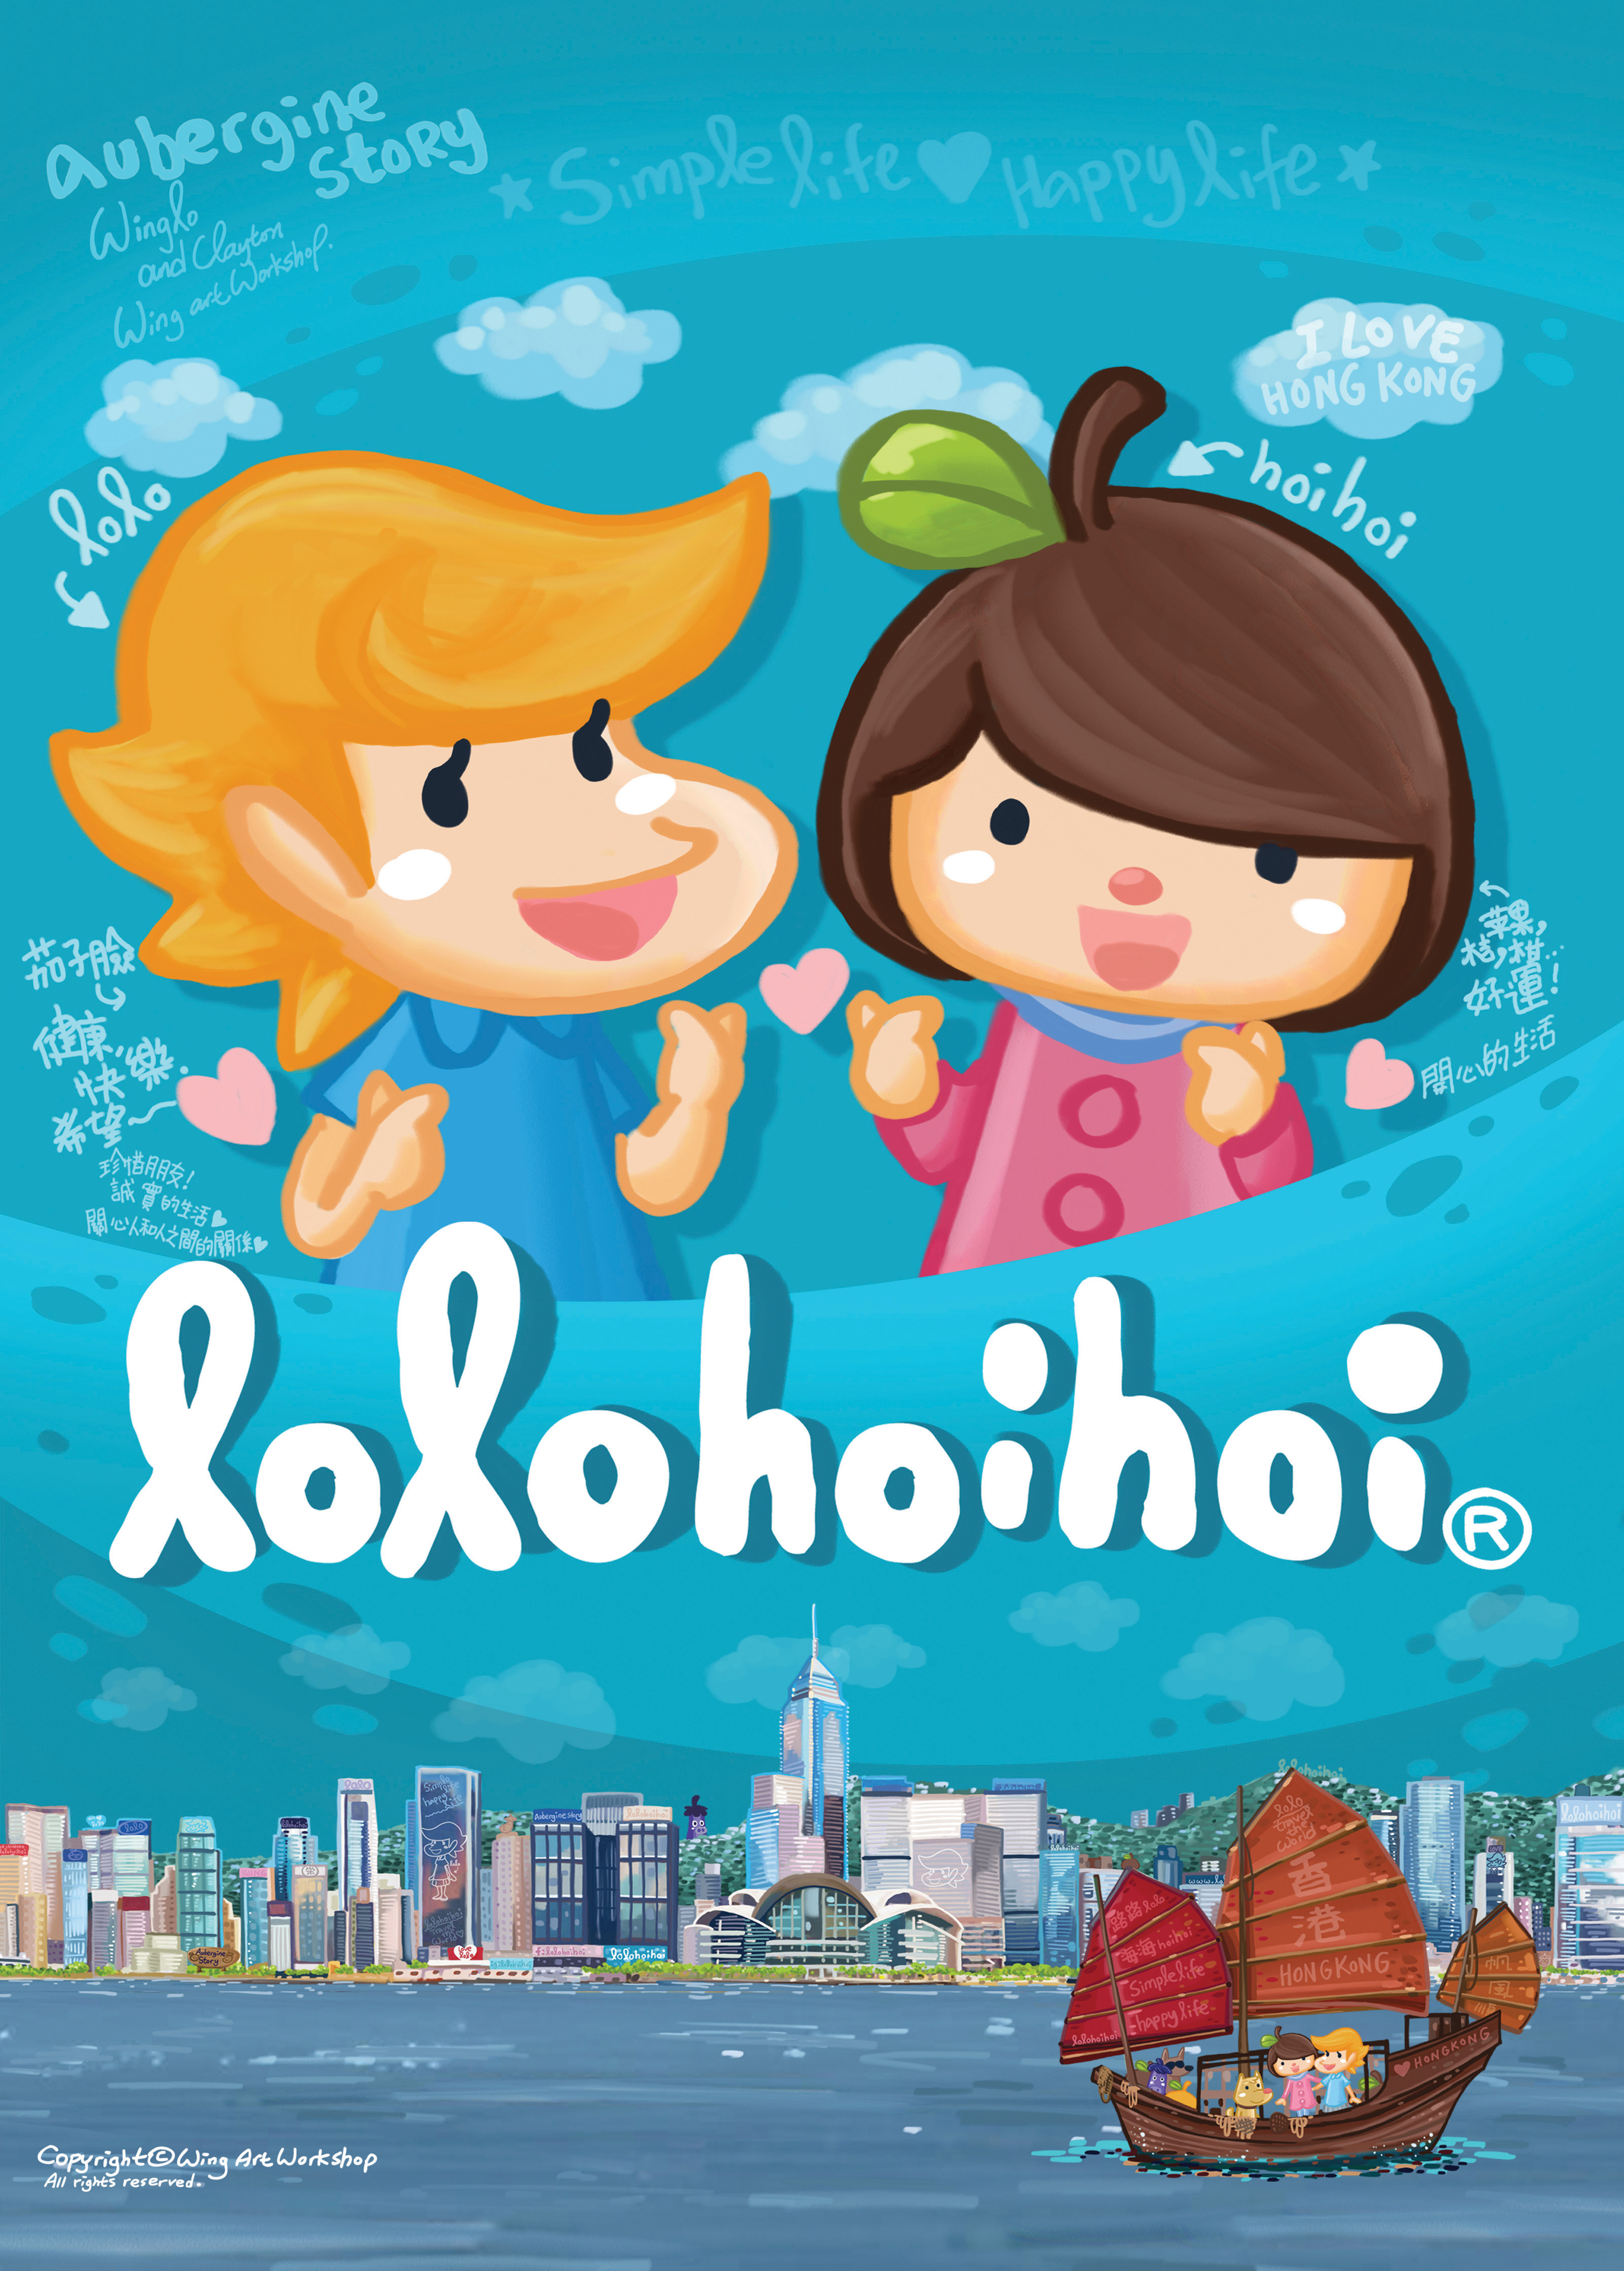 lolohoihoi (IP Licensing Character)